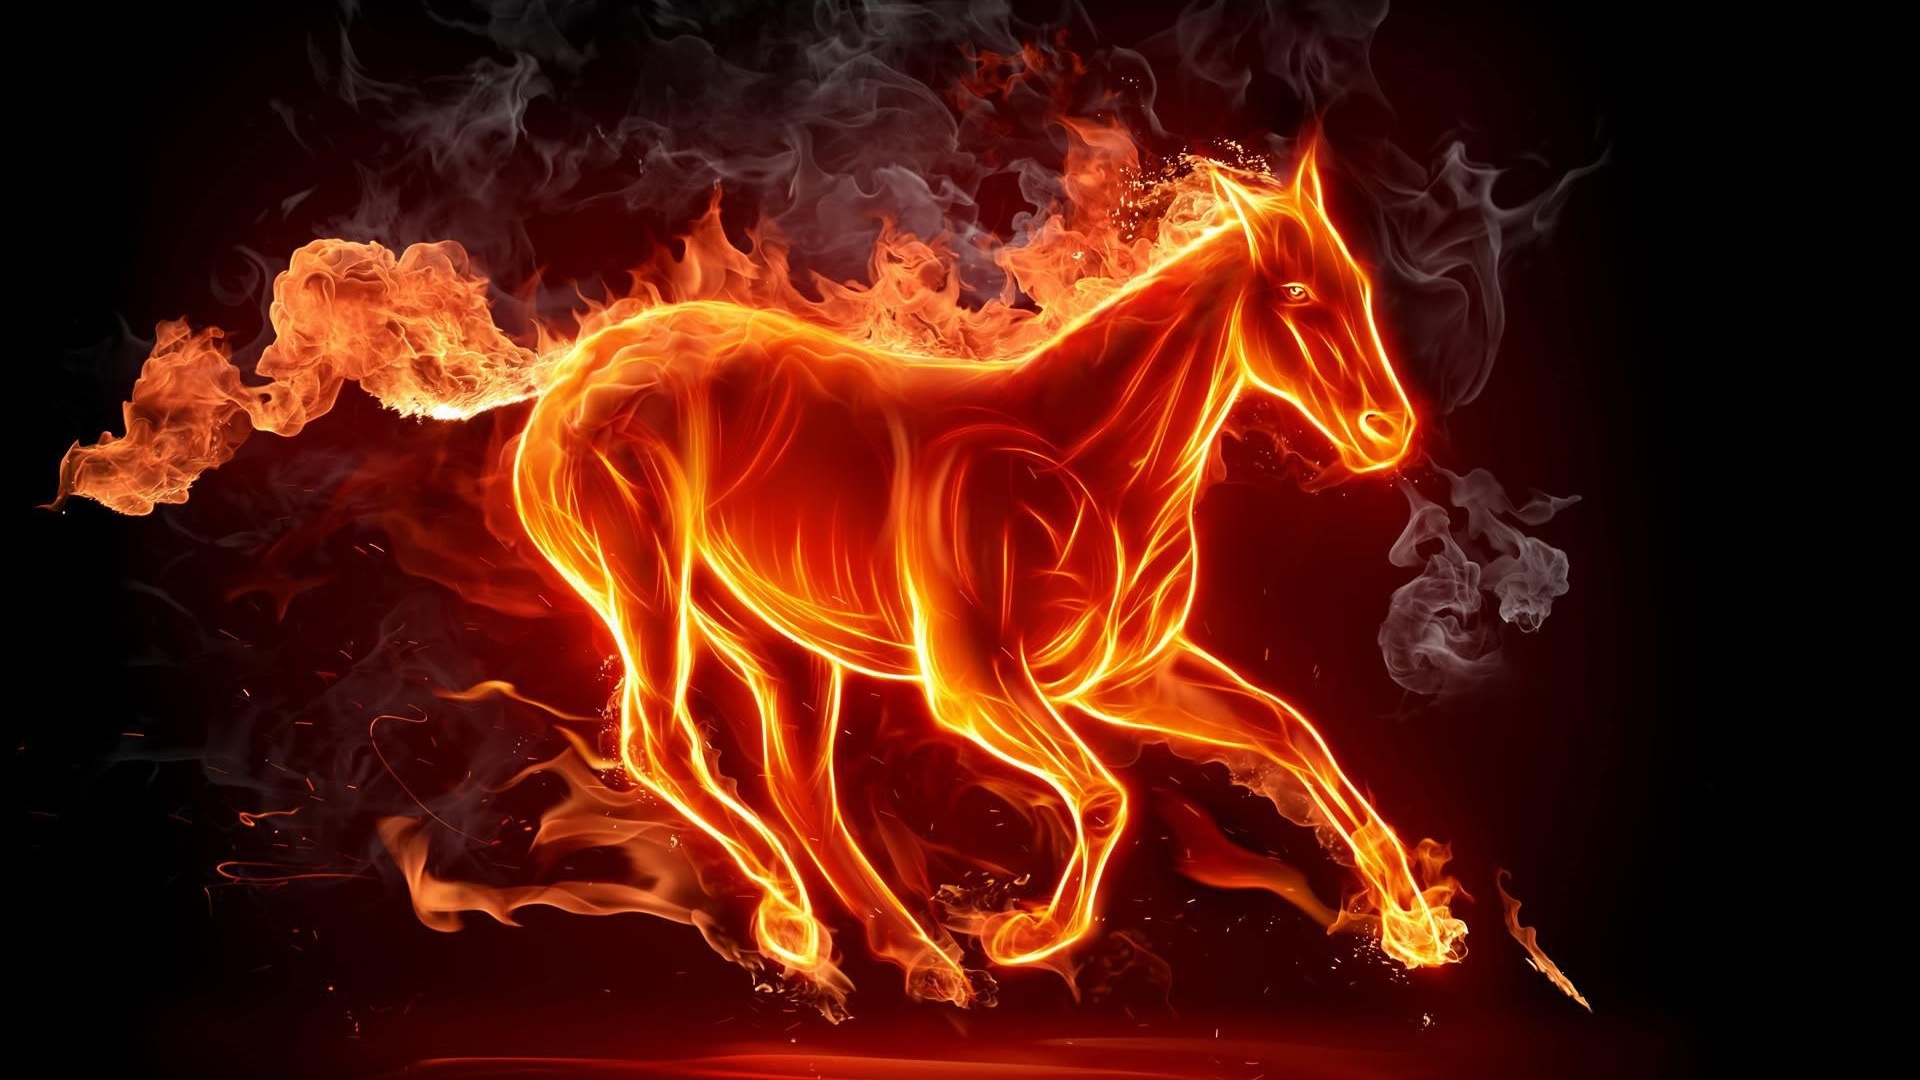 Fire Horse for 1920 x 1080 HDTV 1080p resolution